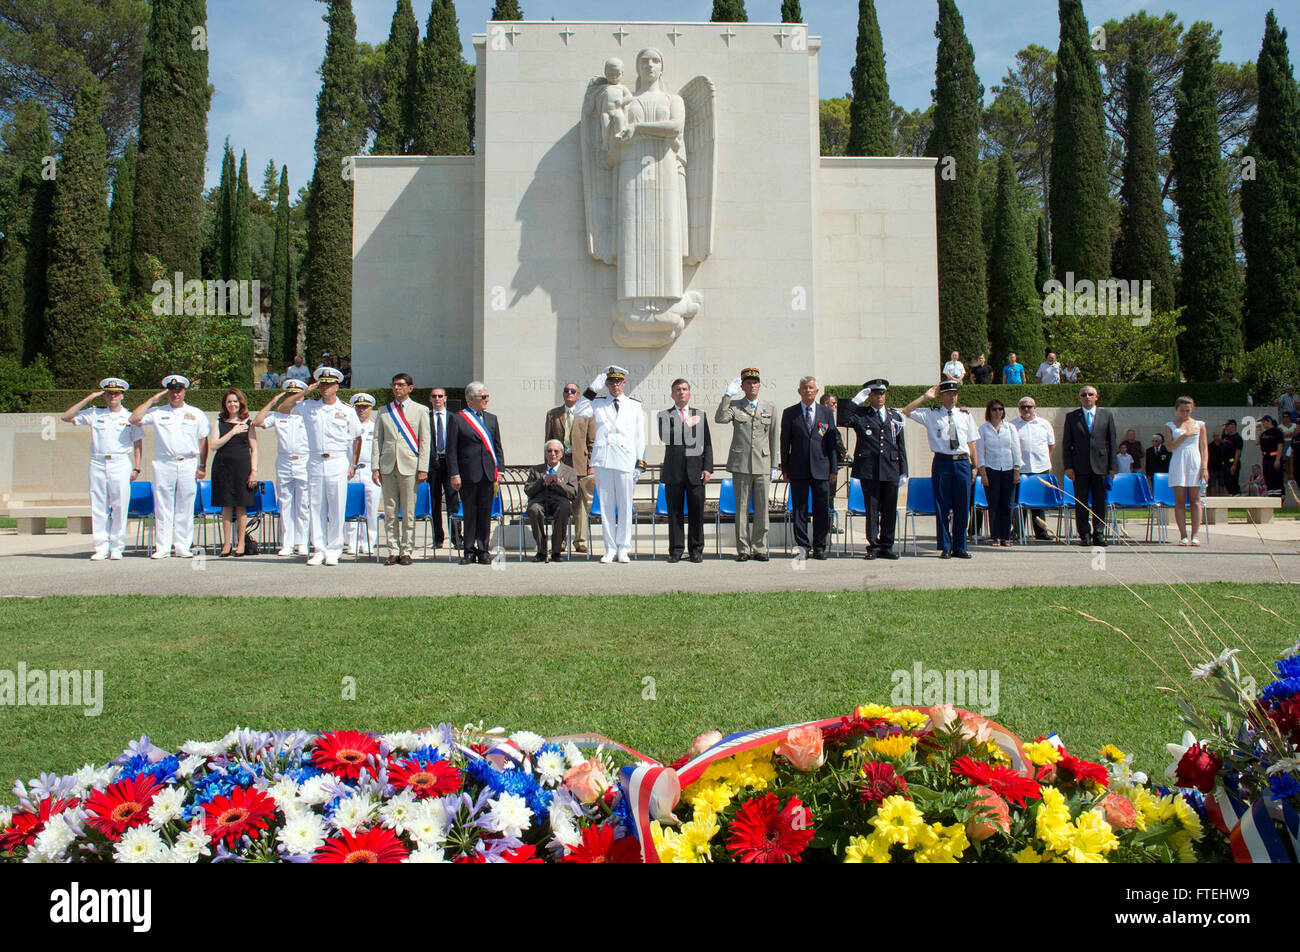 : DRAGUIGNAN, France (August 16, 2013) – Visitors and distinguished guest render honors as the national anthem of the U.S. and France are played during a ceremony at the Rhone American Cemetery in honor of the 69th anniversary celebration of allied troops landing in Provence during World War II. This visit serves to continue U.S. 6th Fleet efforts to build global maritime partnerships with European nations and improve maritime safety and security. Stock Photo